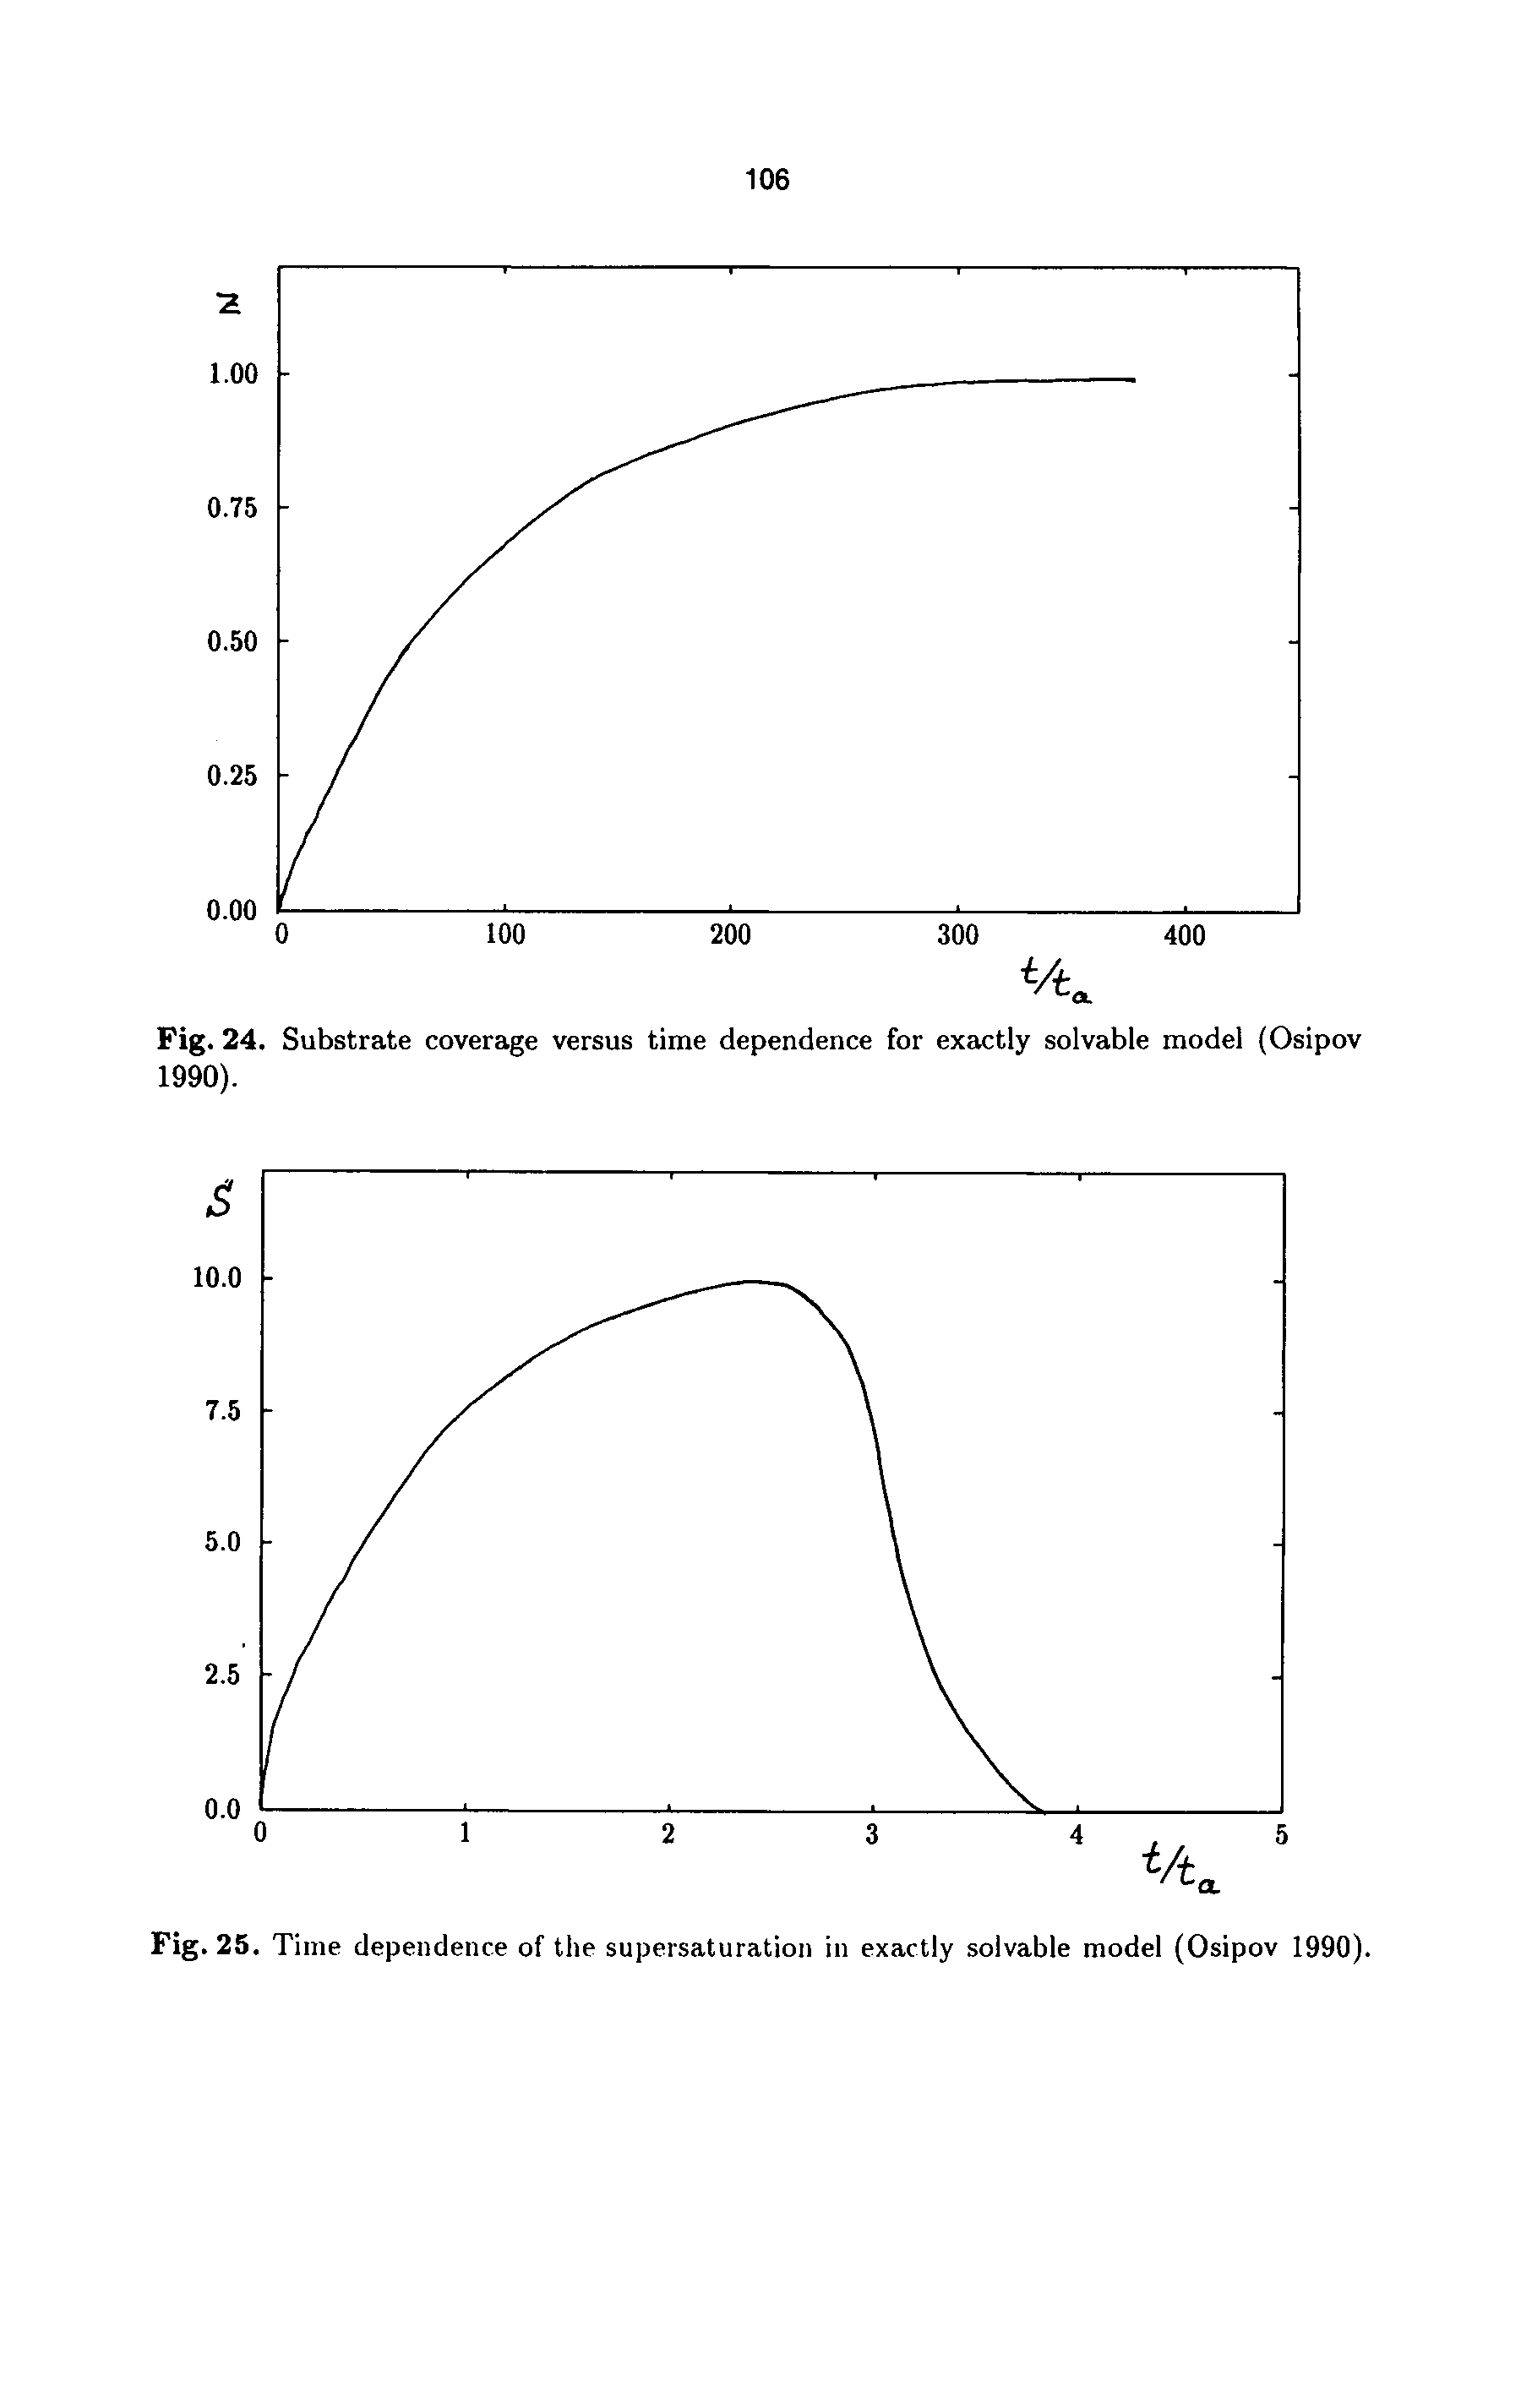 Fig. 24. Substrate coverage versus time dependence for exactly solvable model (Osipov 1990).